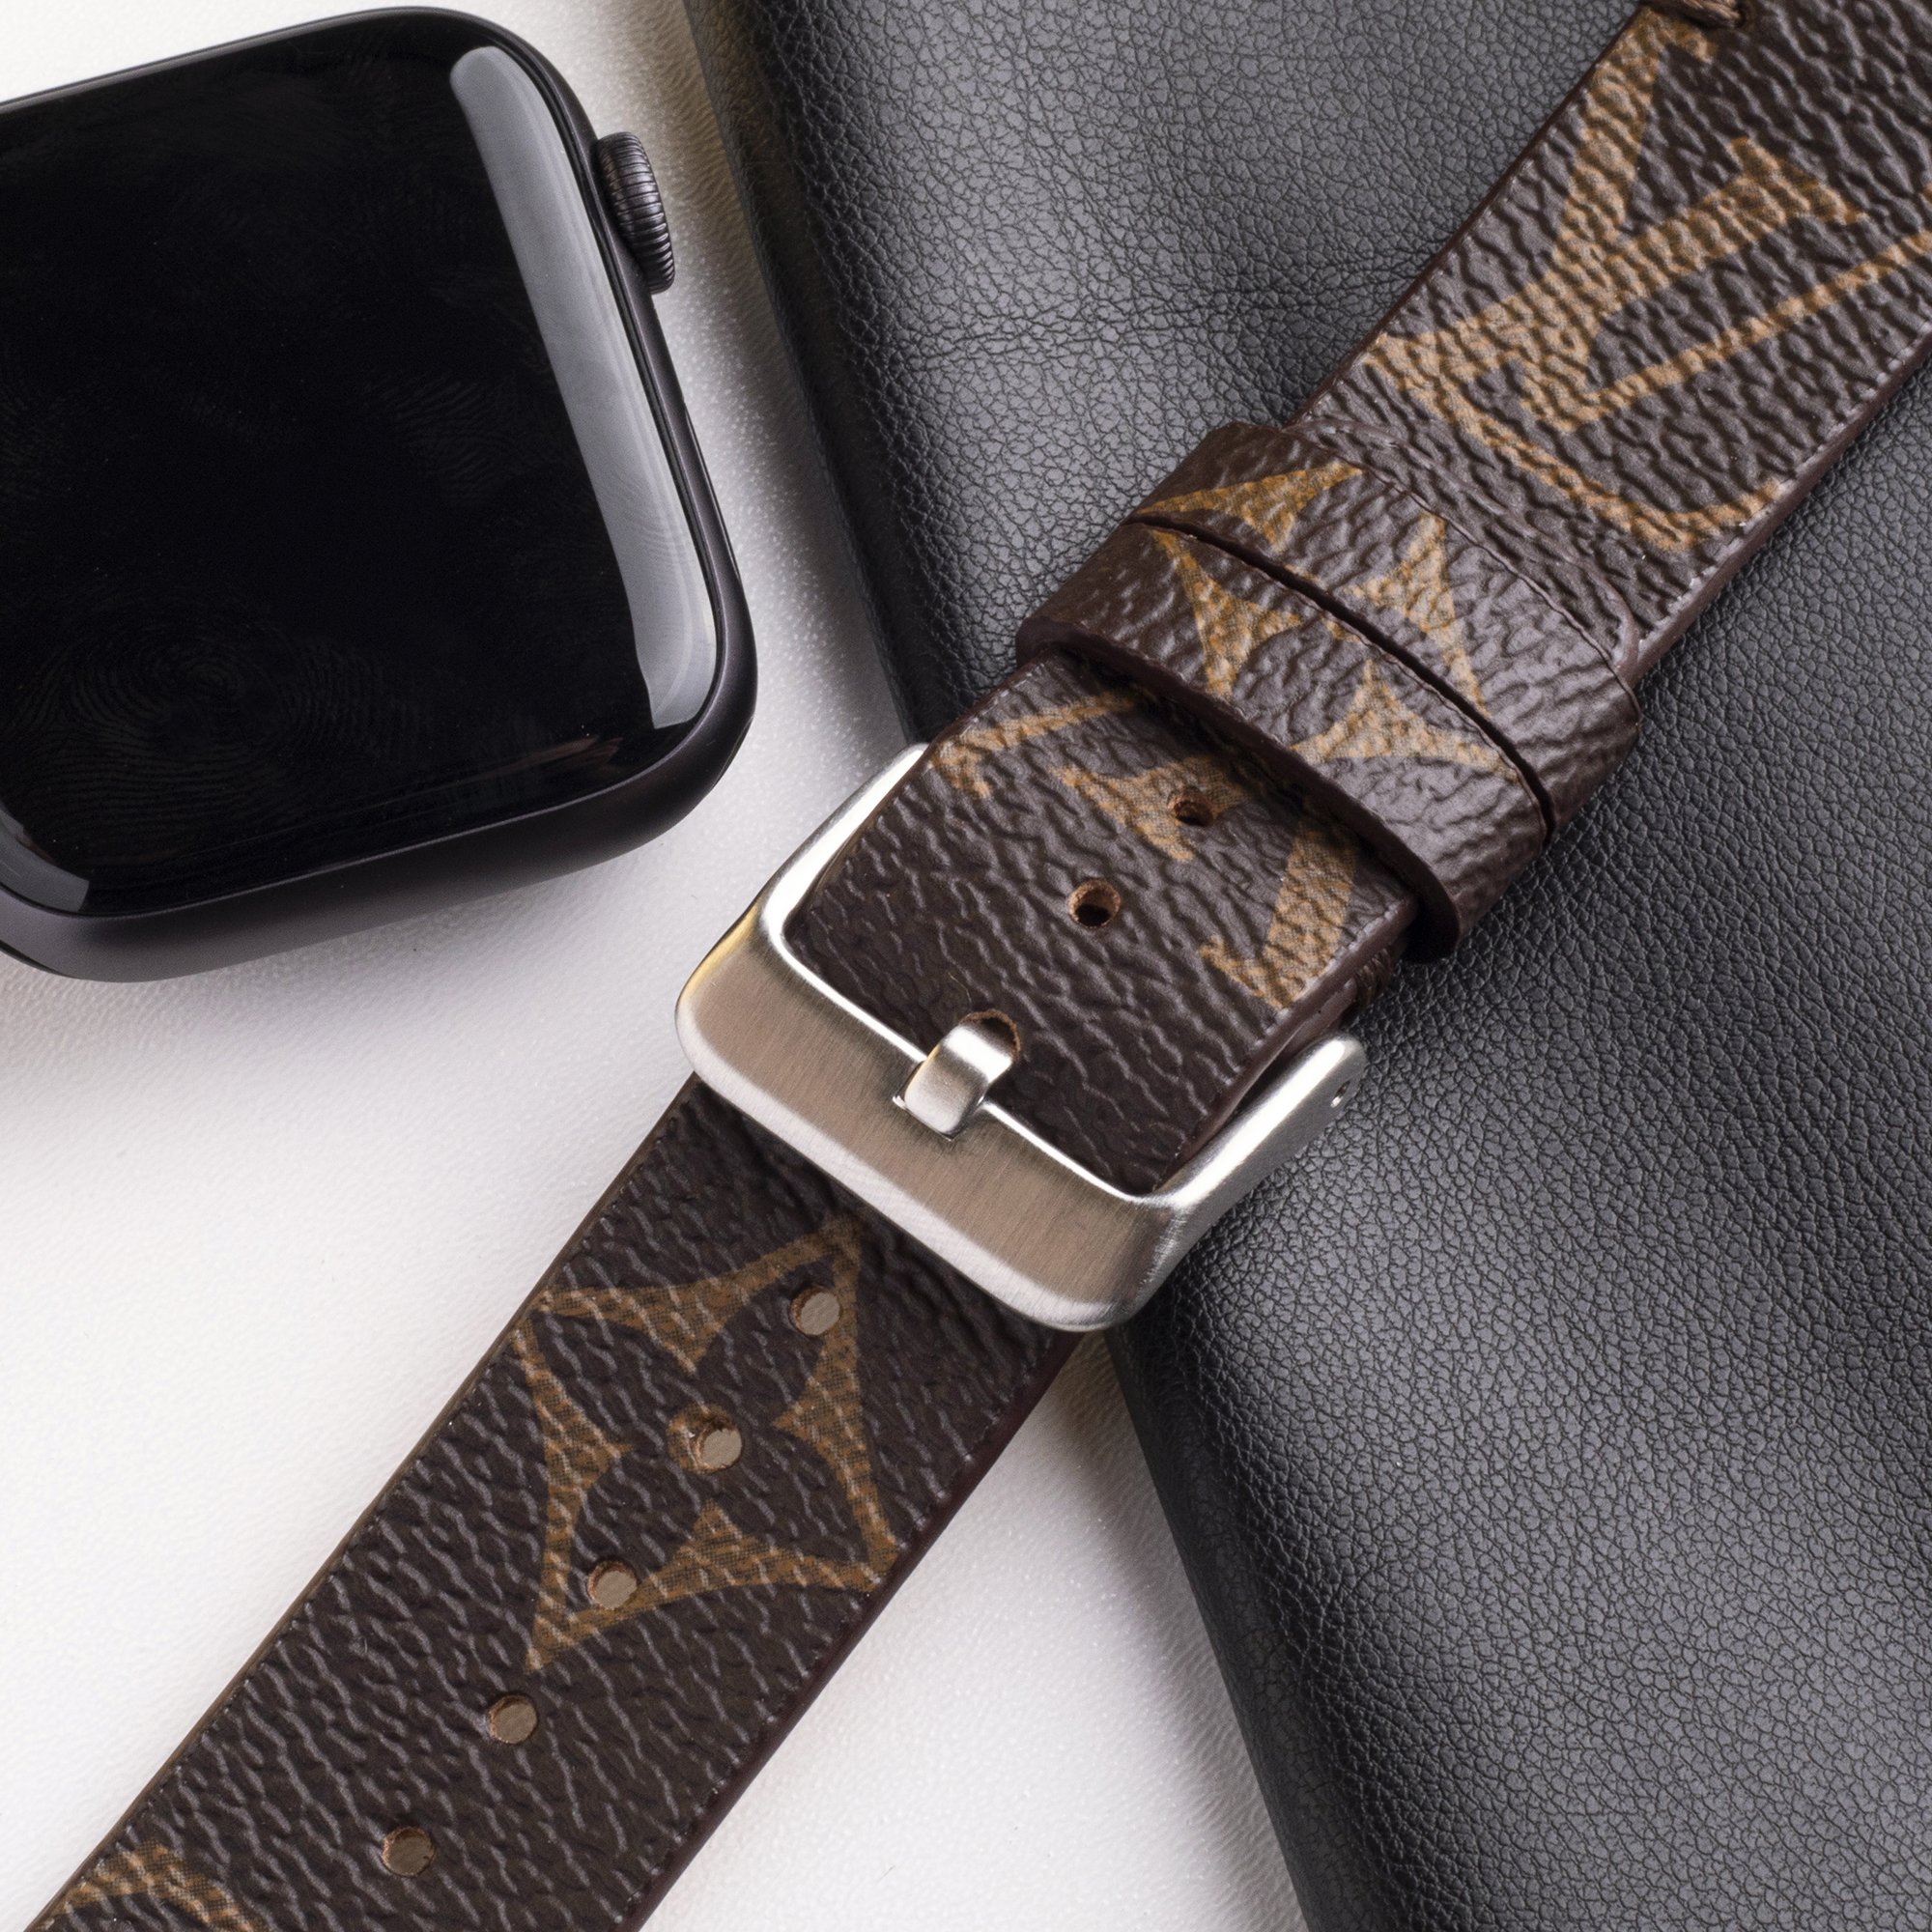 lv Leather Watch strap for Apple watch